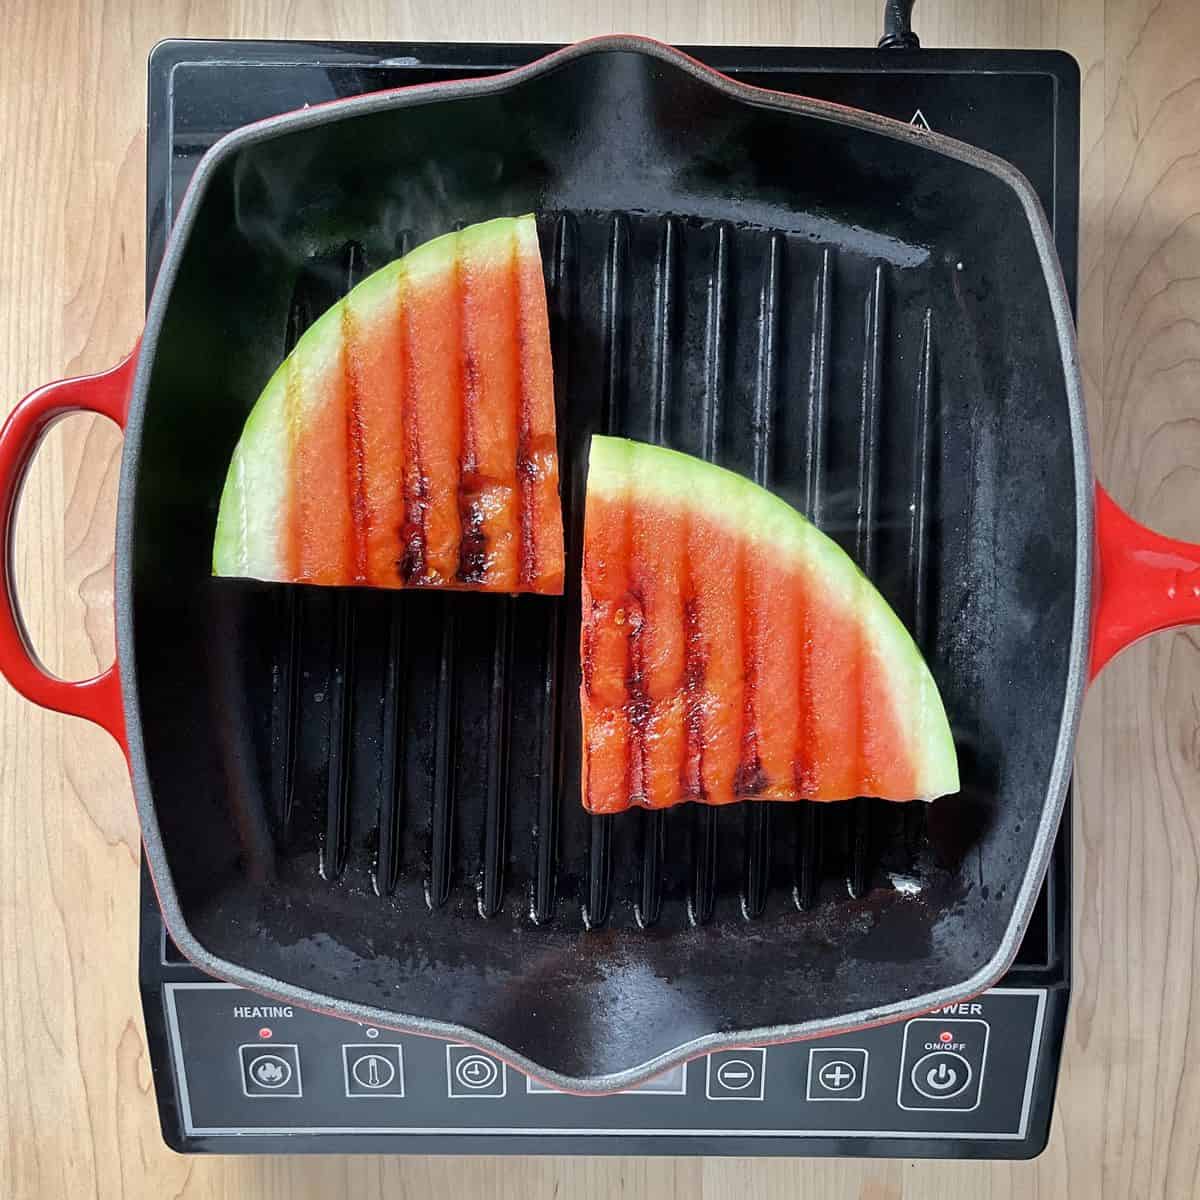 Slices of watermelon on a grill.